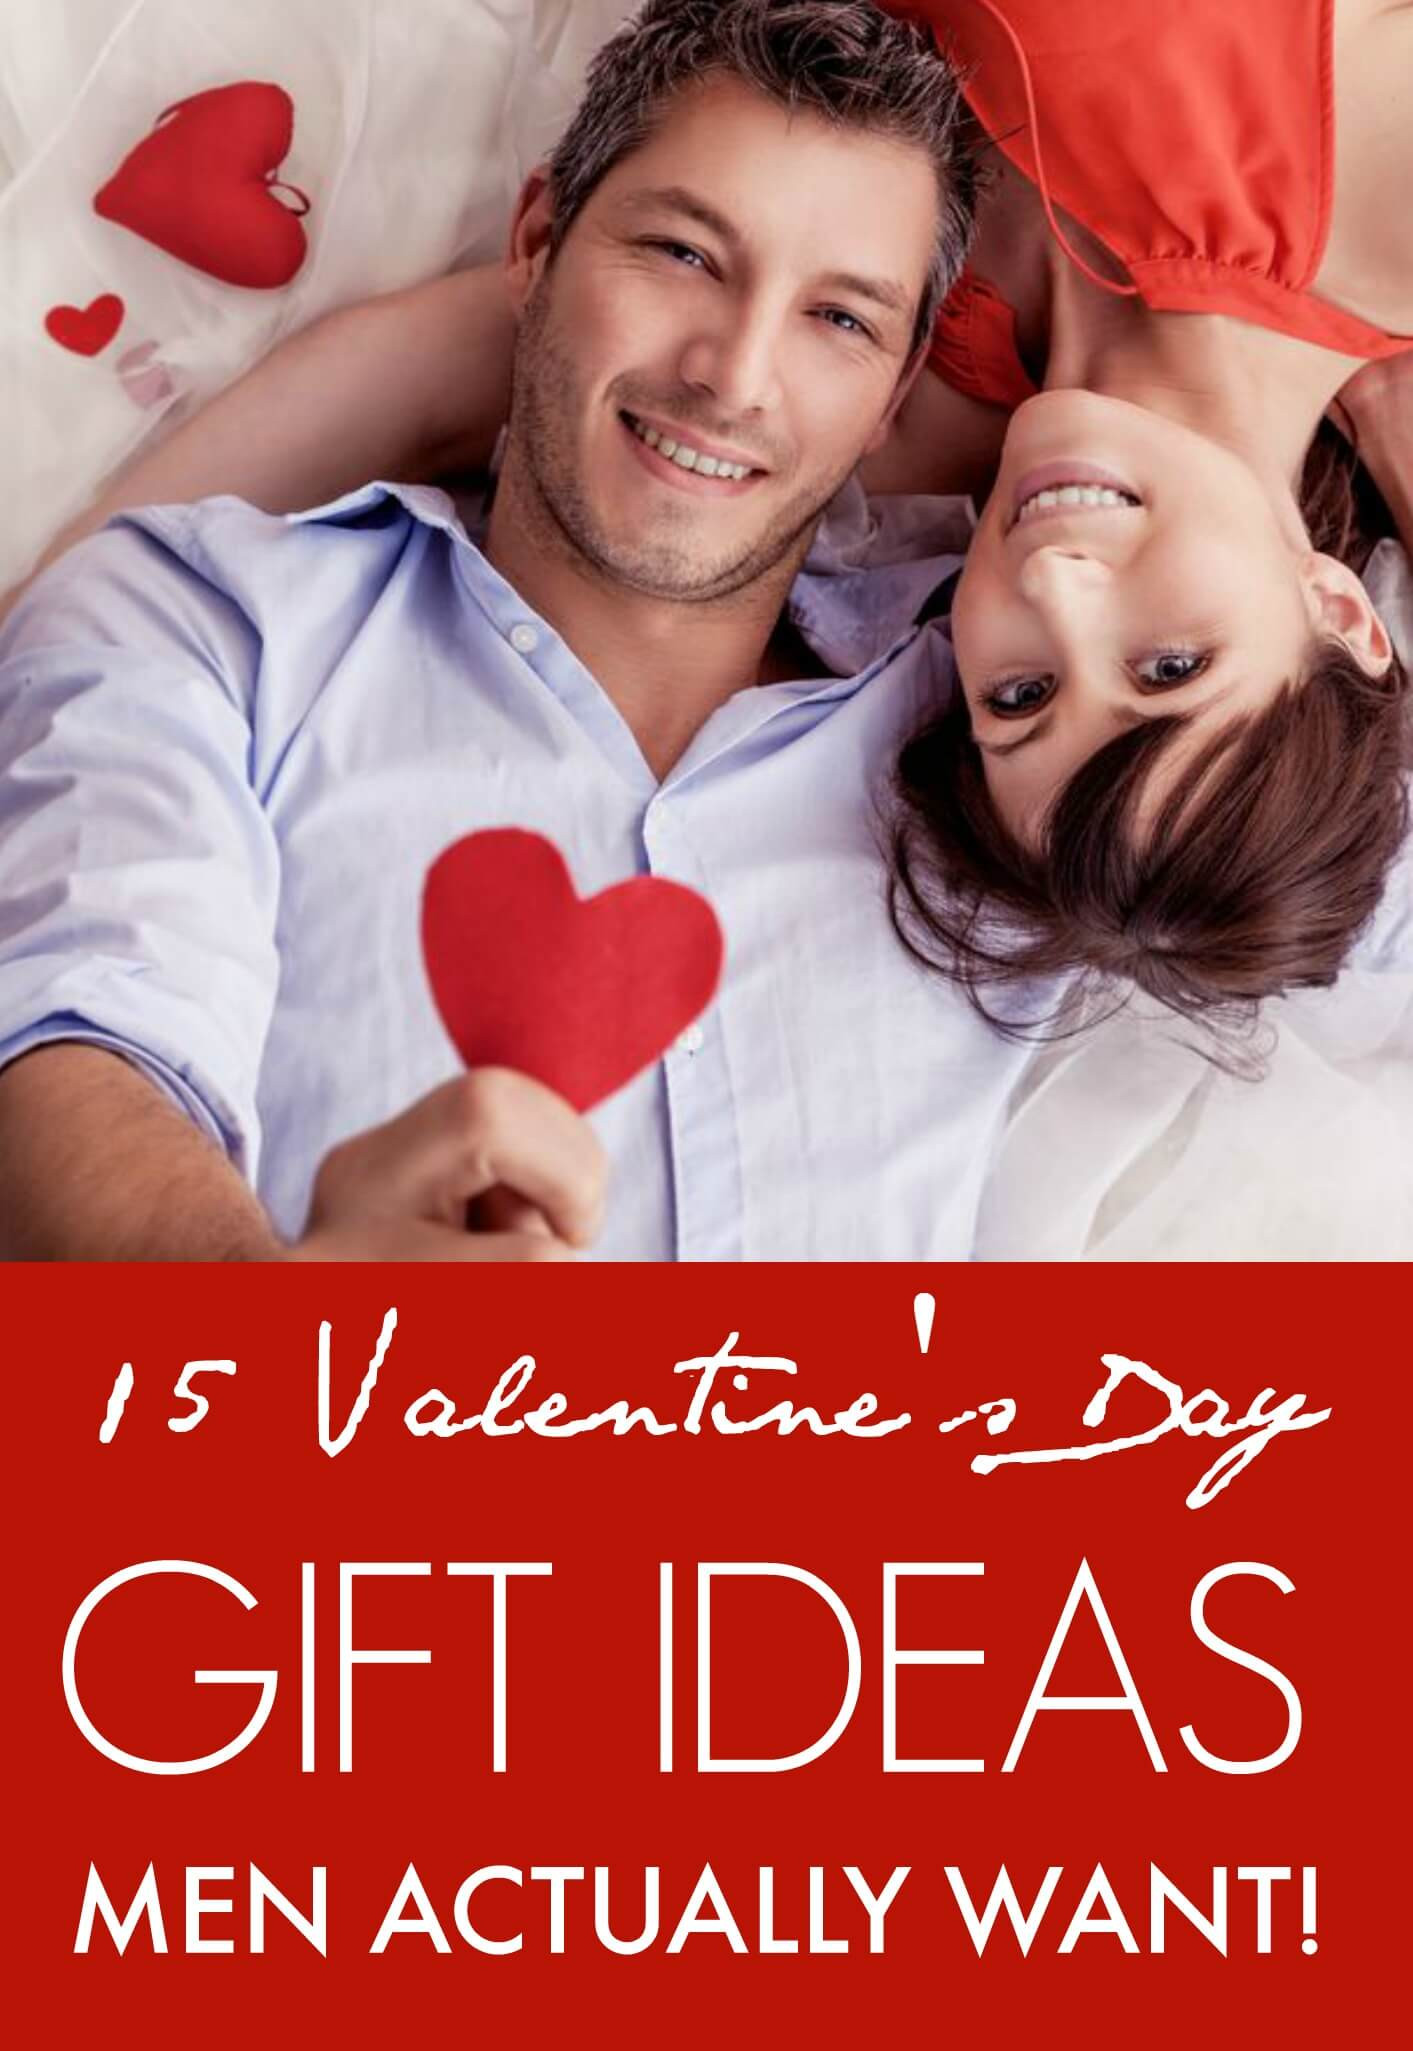 Valentine Guy Gift Ideas
 15 Valentine’s Day Gift ideas Men Actually Want